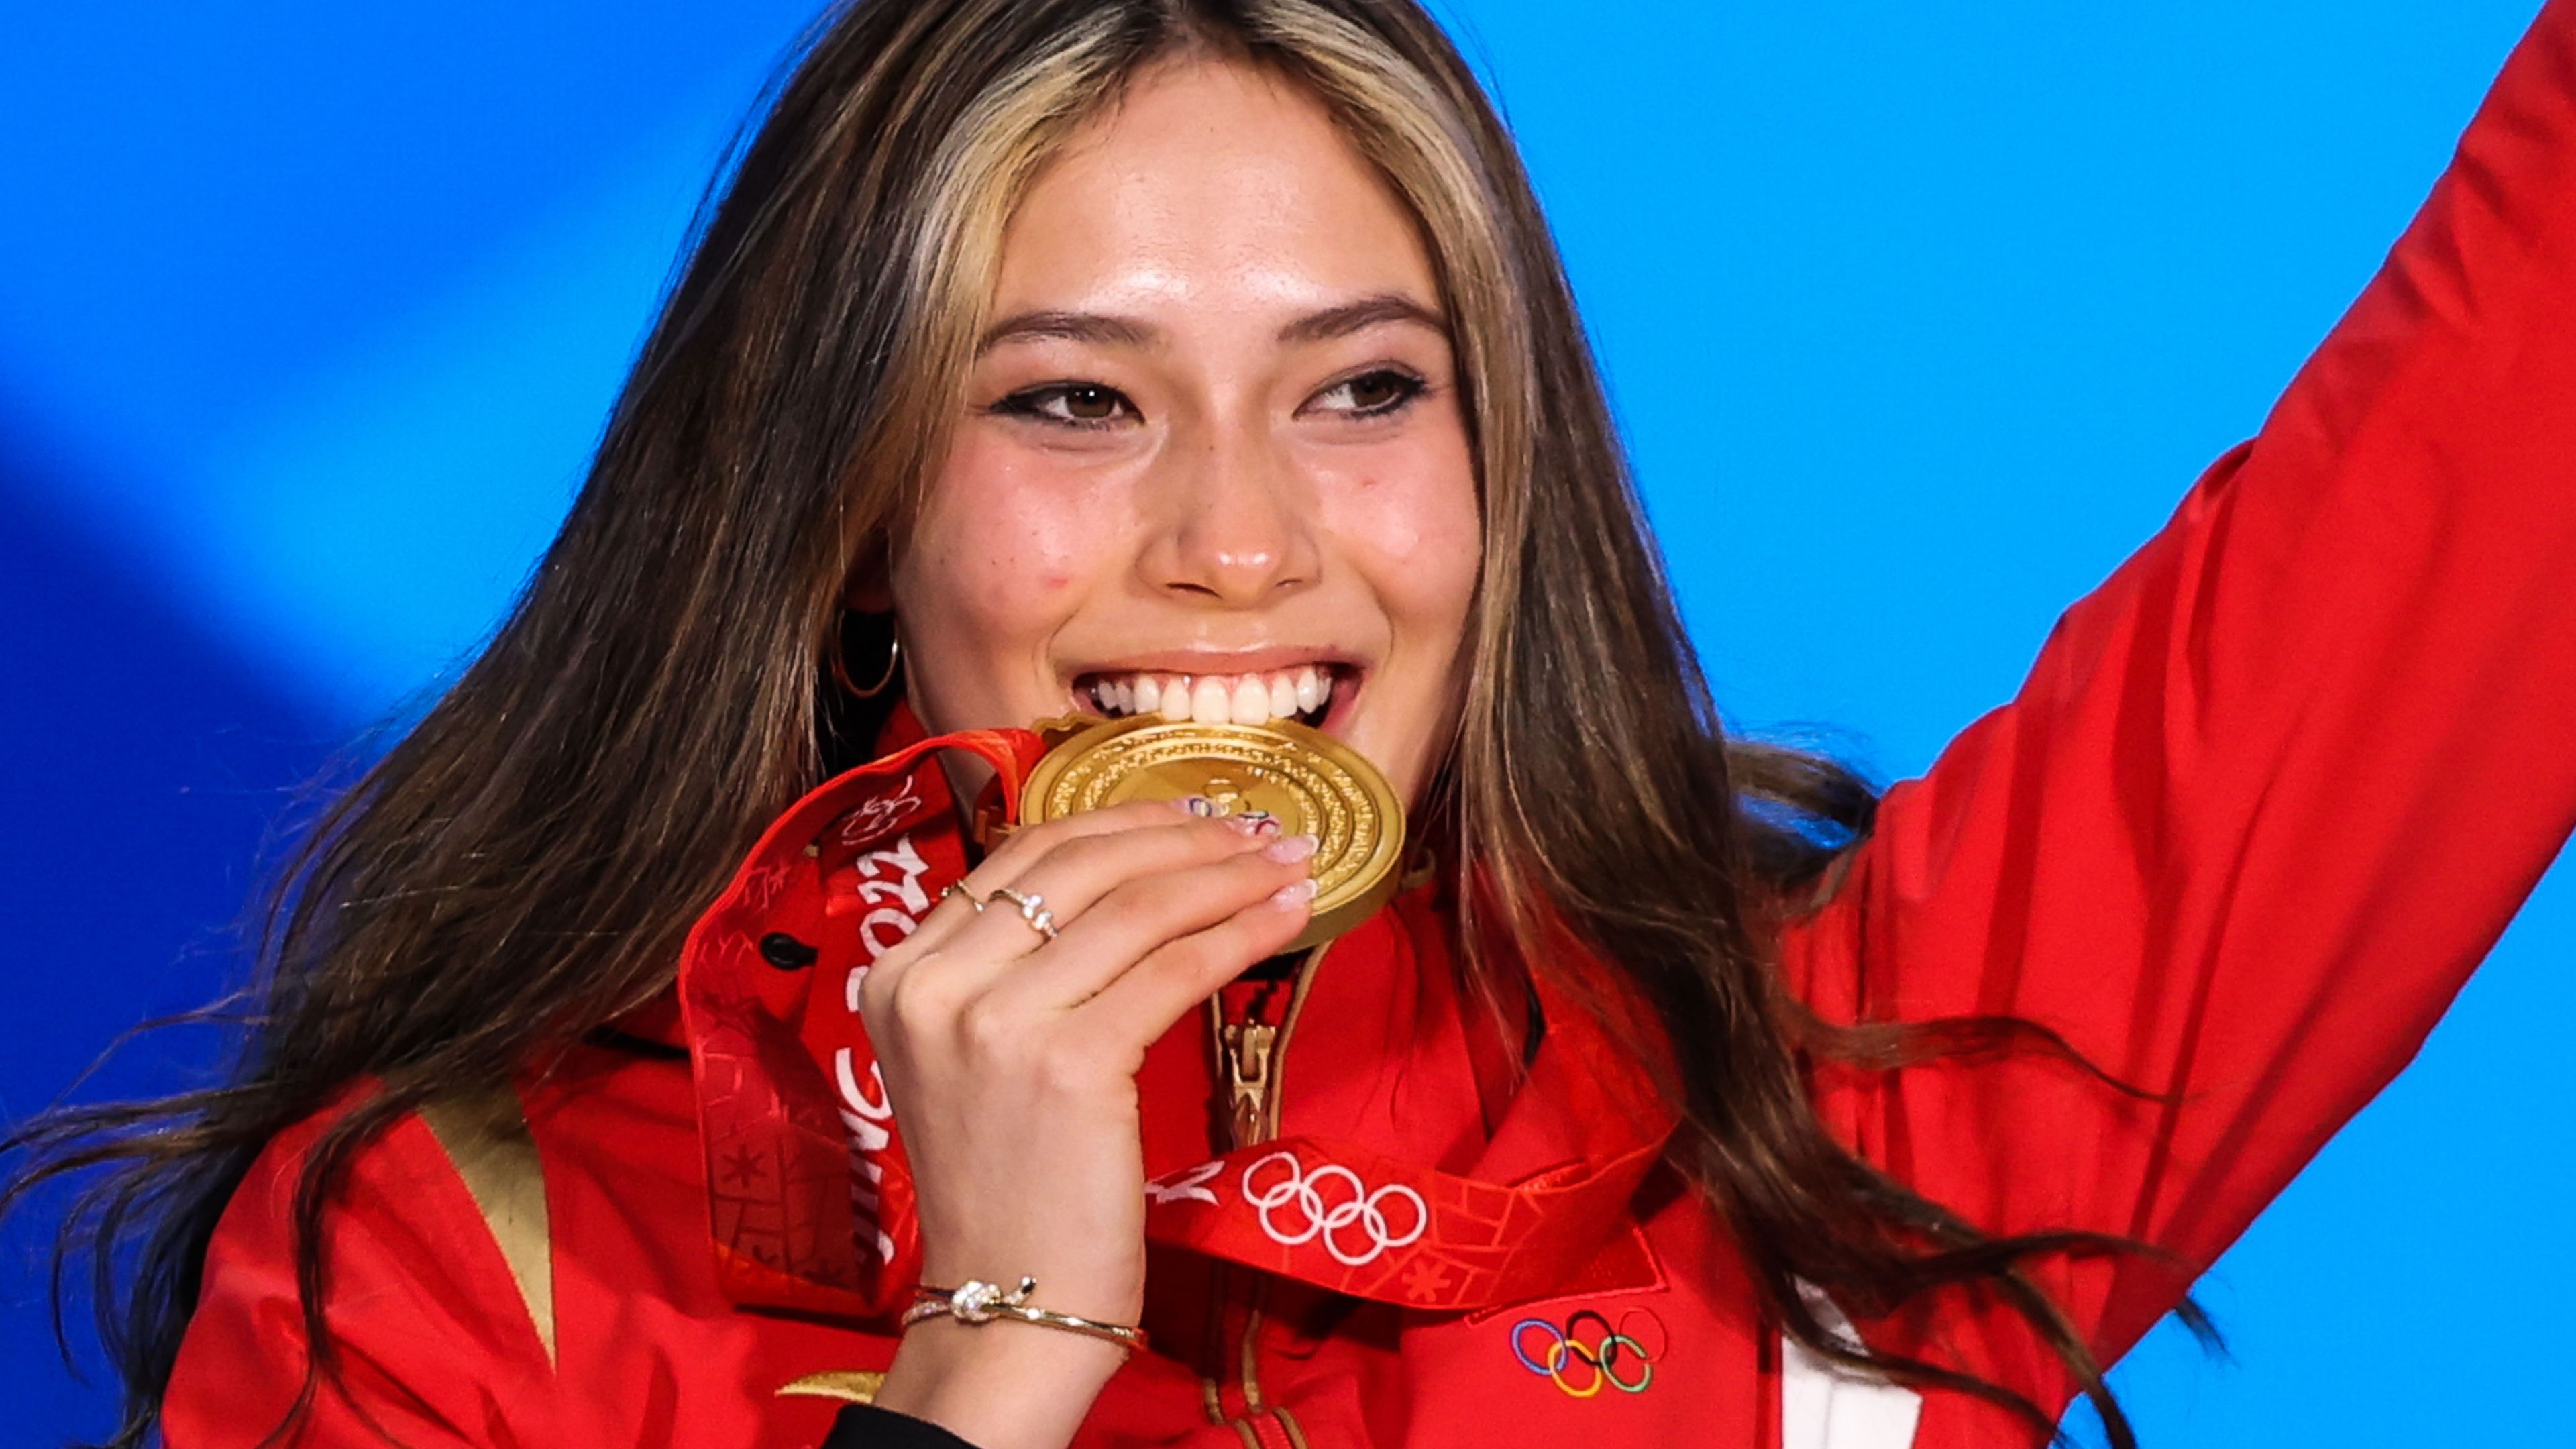 Eileen Gu is the poster child for a new type of Chinese athlete